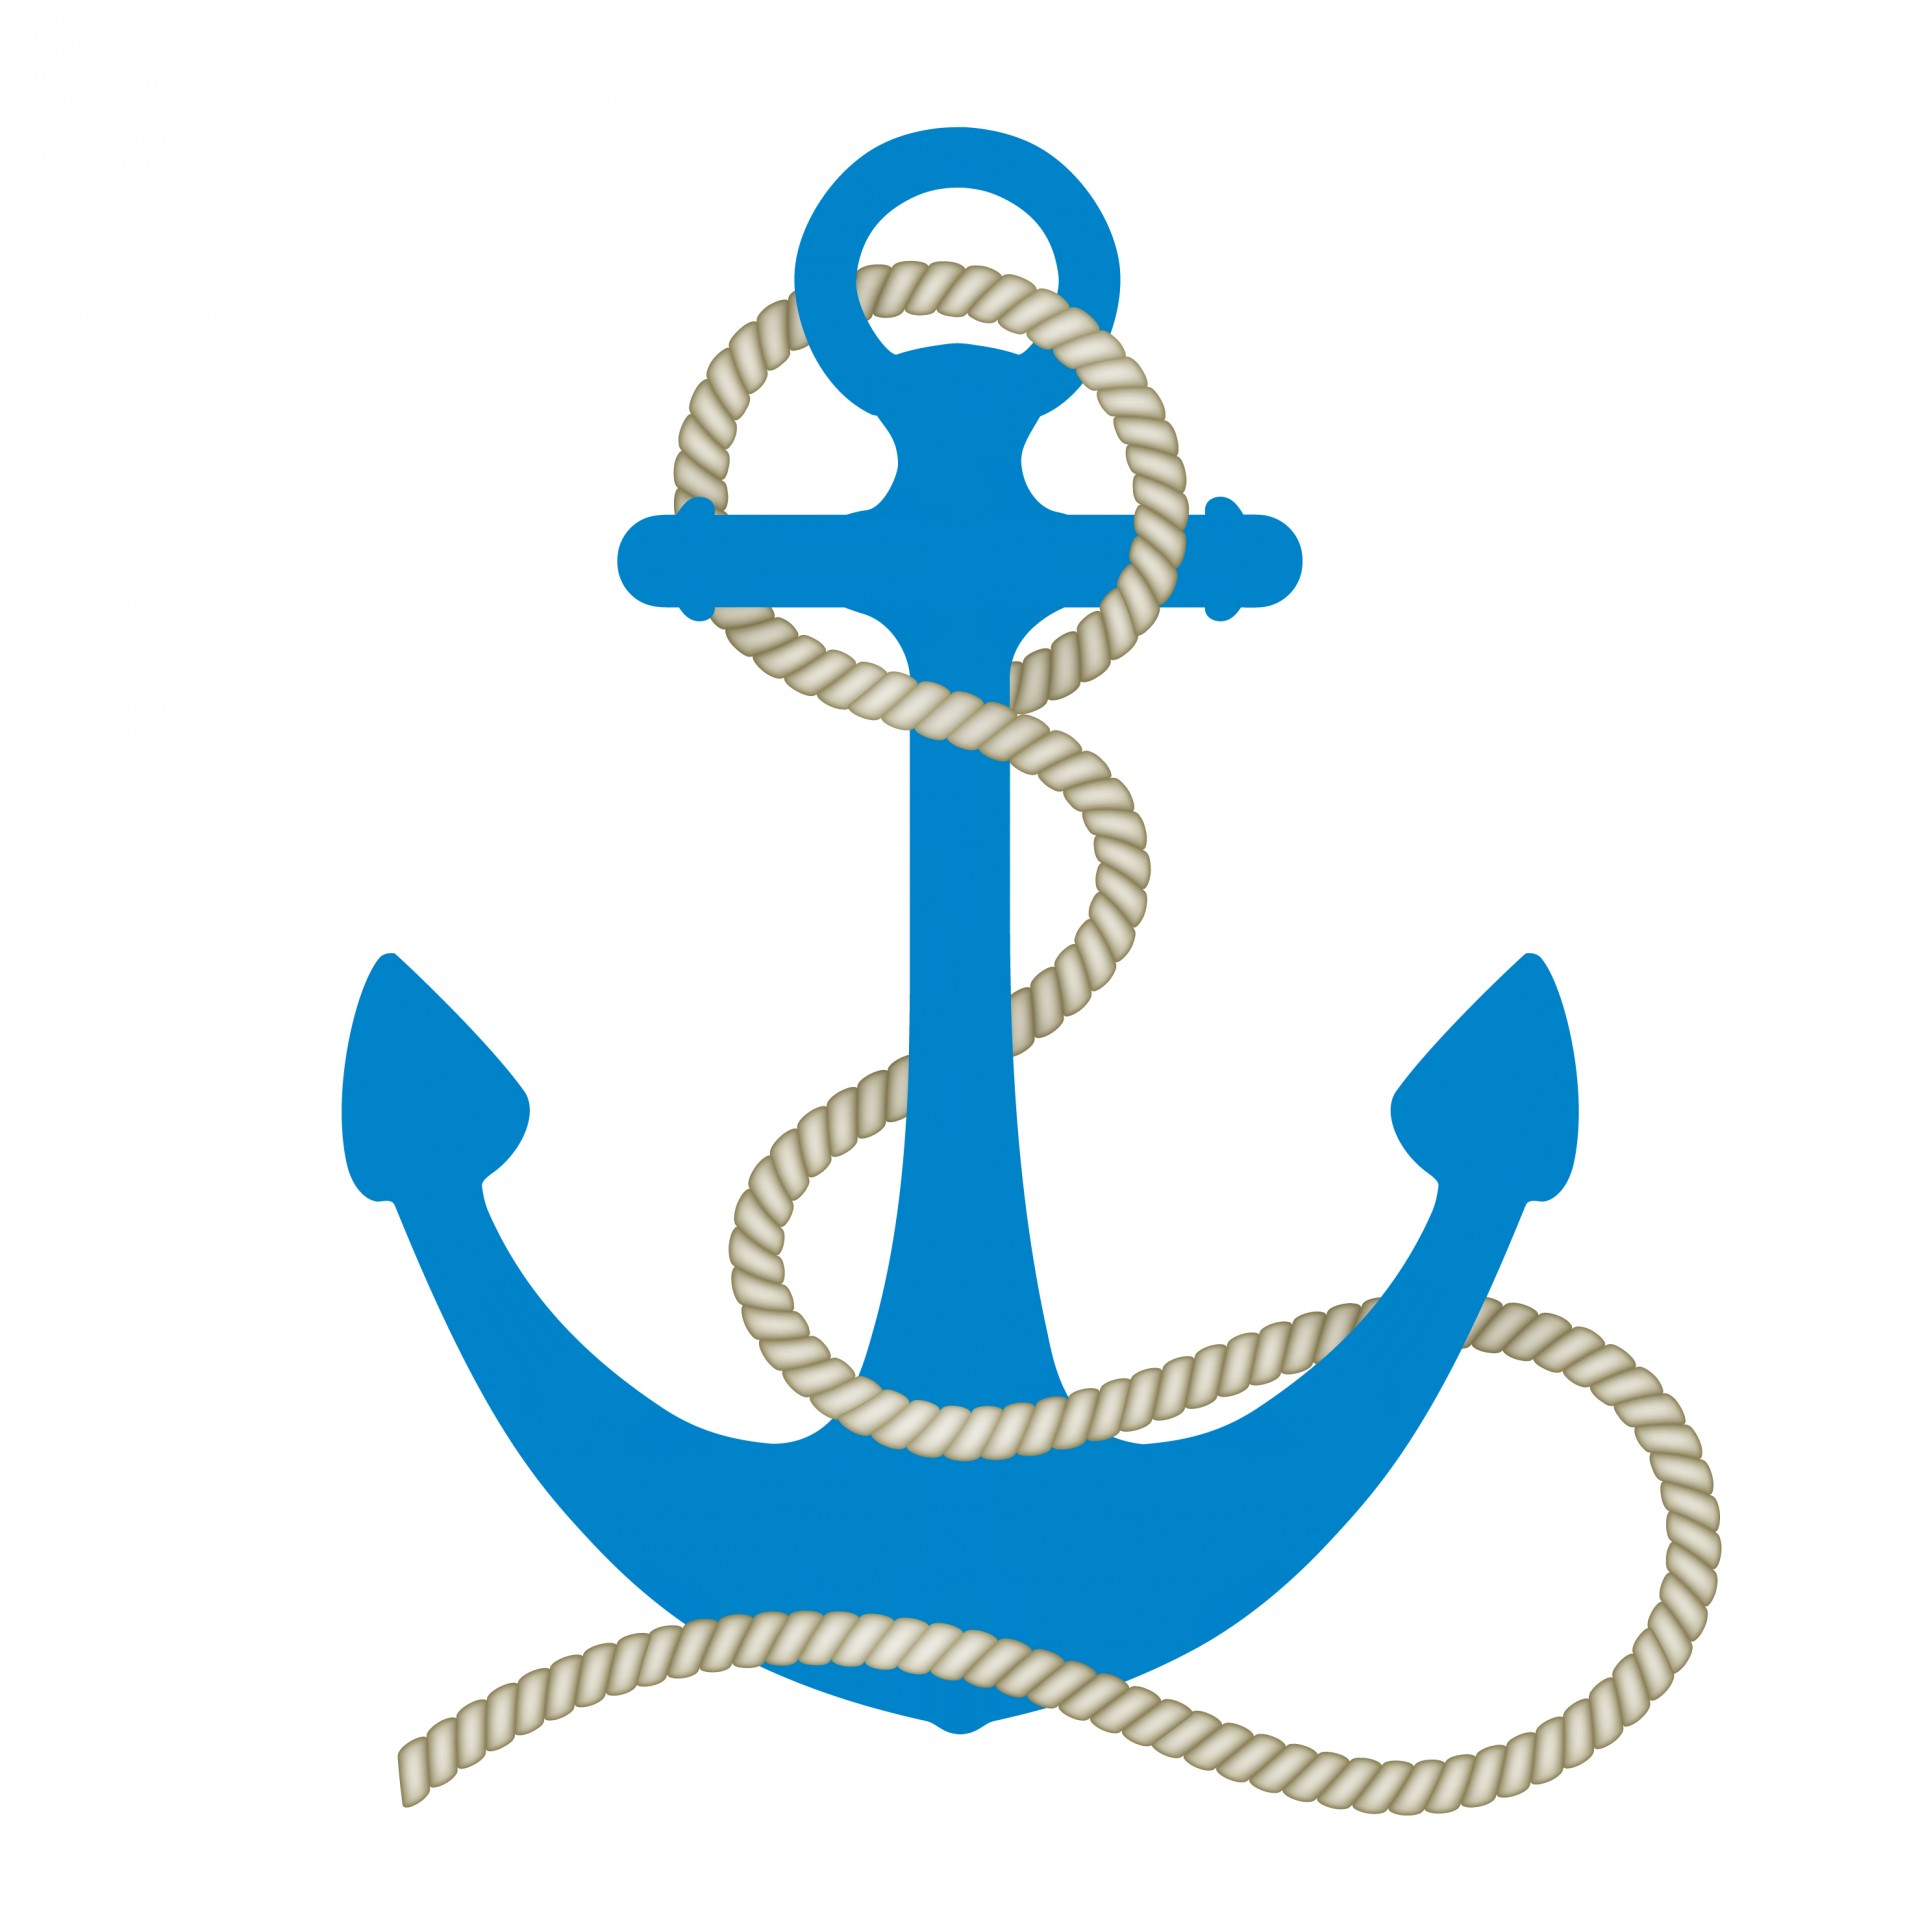 Download free photo of Anchor,rope,entwined,blue,nautical - from